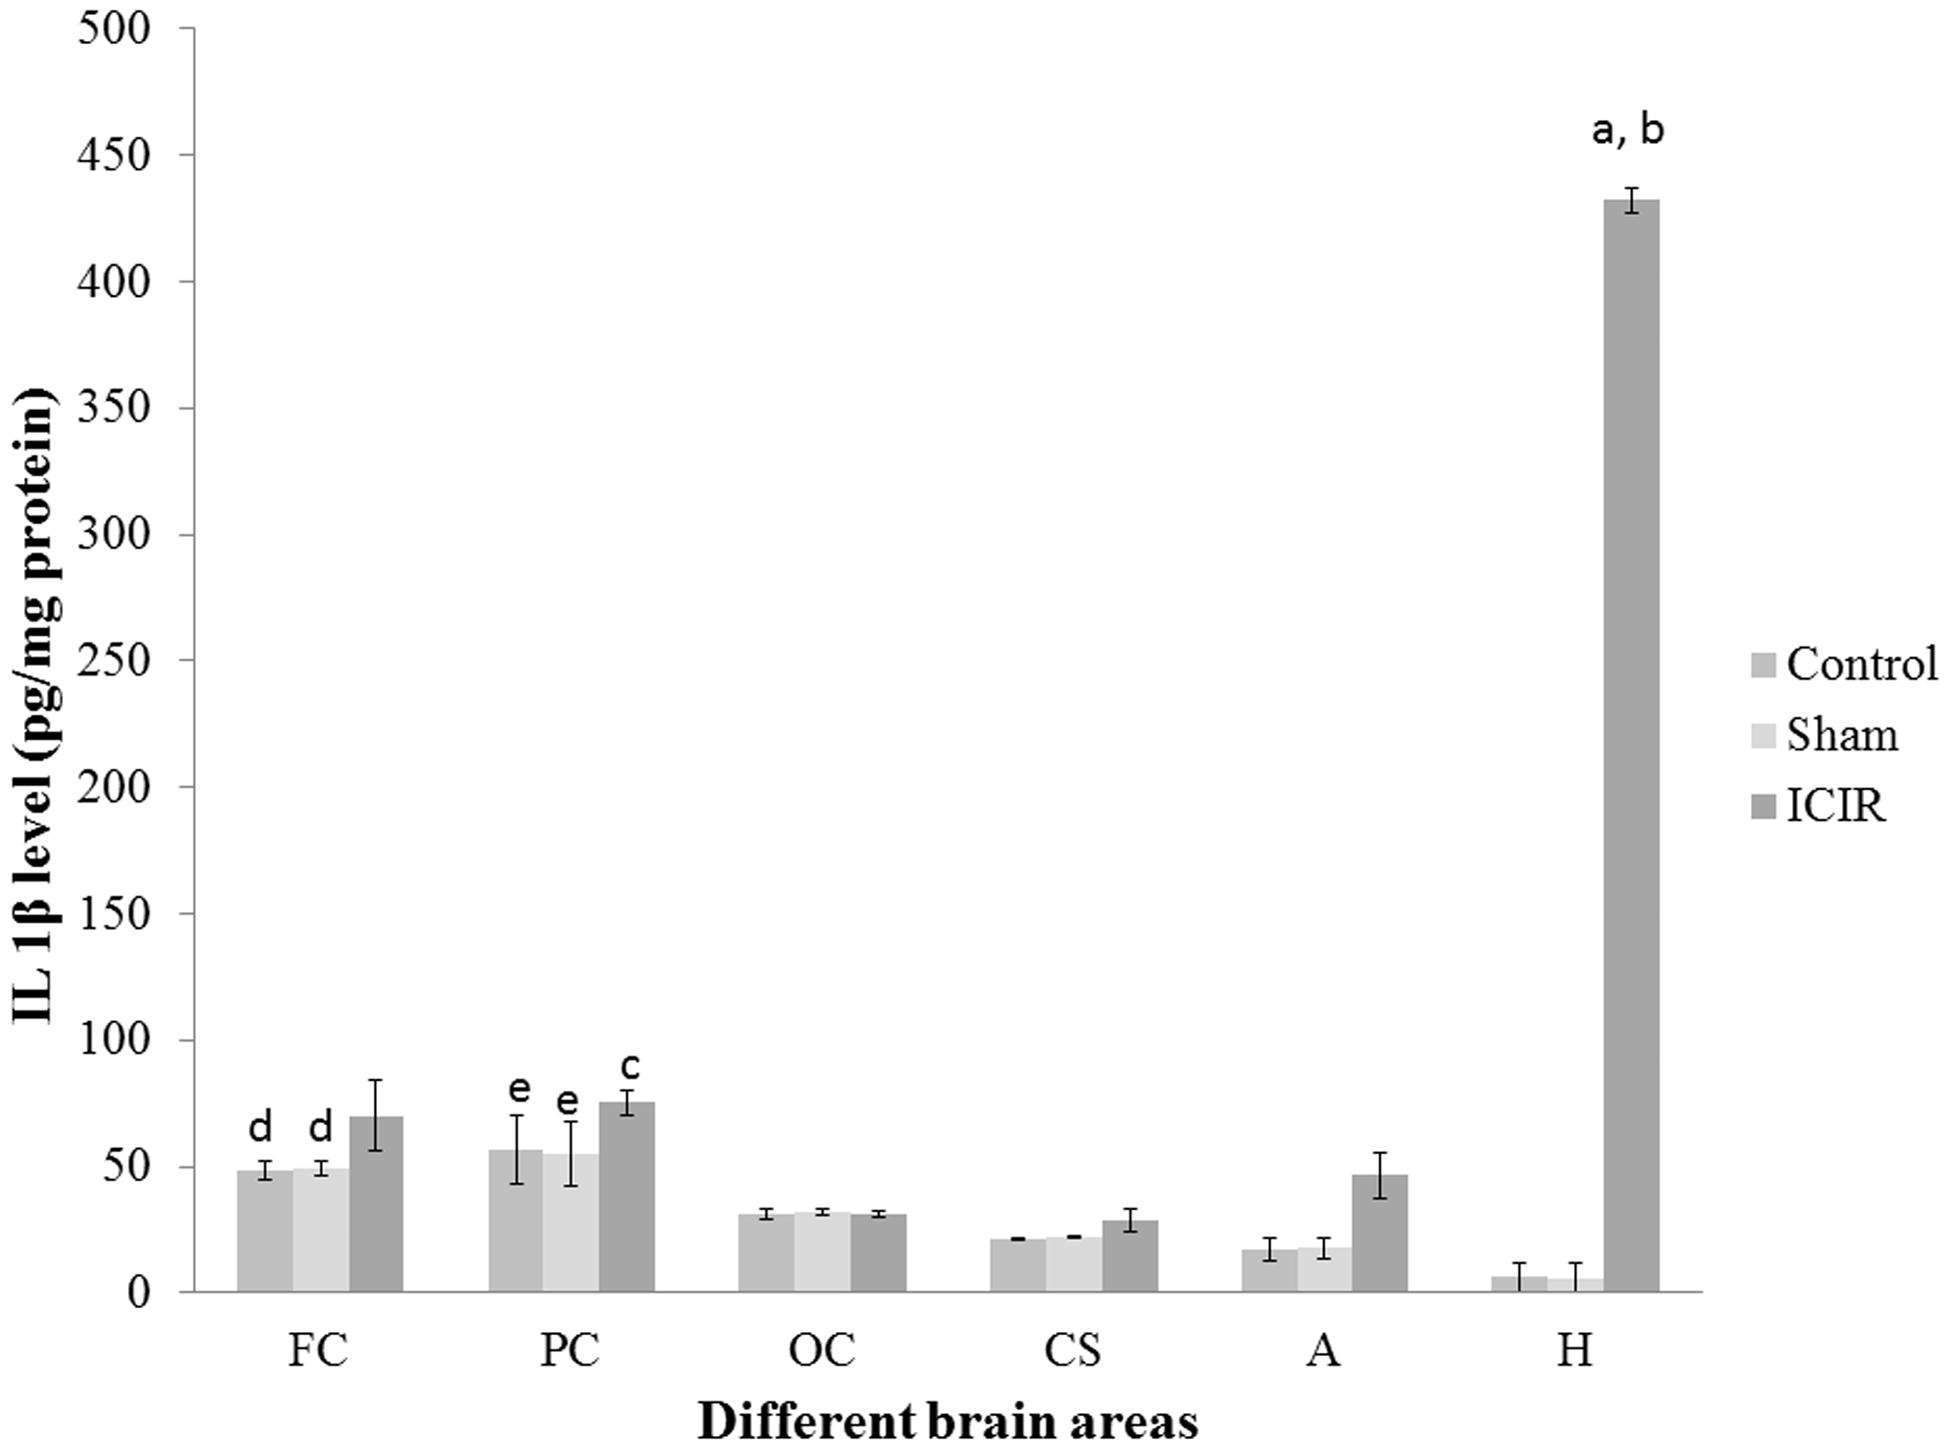 Figure 8. IL 1β levels in different brain areas of rats. (a) Significant difference (p < 0.001) between hippocampus levels in C and S rats vs in ICIR hosts. (b) Significant difference (p < 0.001) between hippocampus vs amygdala, frontal cortex, parietal cortex, occipital cortex and corpus striatum in ICIR hosts. (c) Significant difference (p < 0.05) between parietal cortex vs corpus striatum and occipital cortex in ICIR hosts. (d) Significant difference (p < 0.05) between hippocampus vs frontal cortex in control/sham operated rats. (e) Significant difference (p < 0.01) between hippocampus vs parietal cortex in C and S rats. Values shown are means ± SEM (n = 6/group). Abbreviations are as outlined in legend to Figure 3.